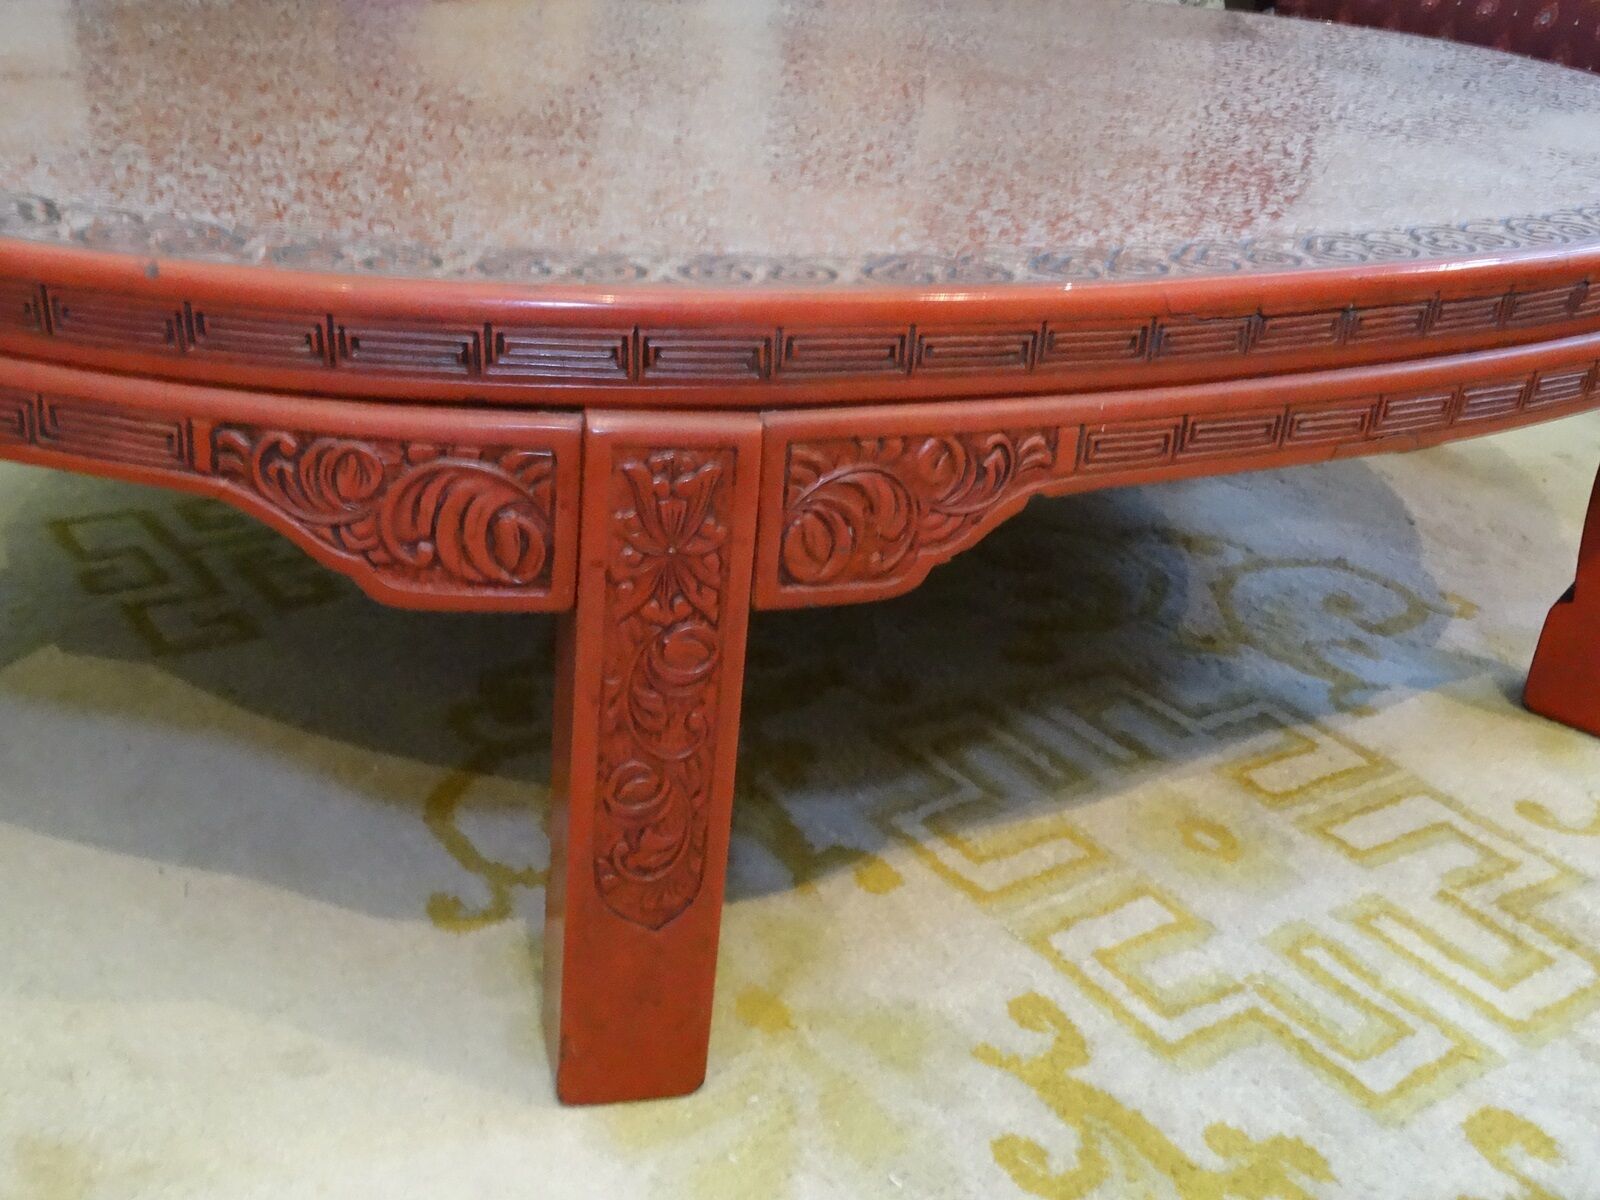 ANTIQUE LATE 19 c. CHINESE LACQUER INTRICATE CARVED CINNABAR COFFEE TABLE Без бренда - фотография #12